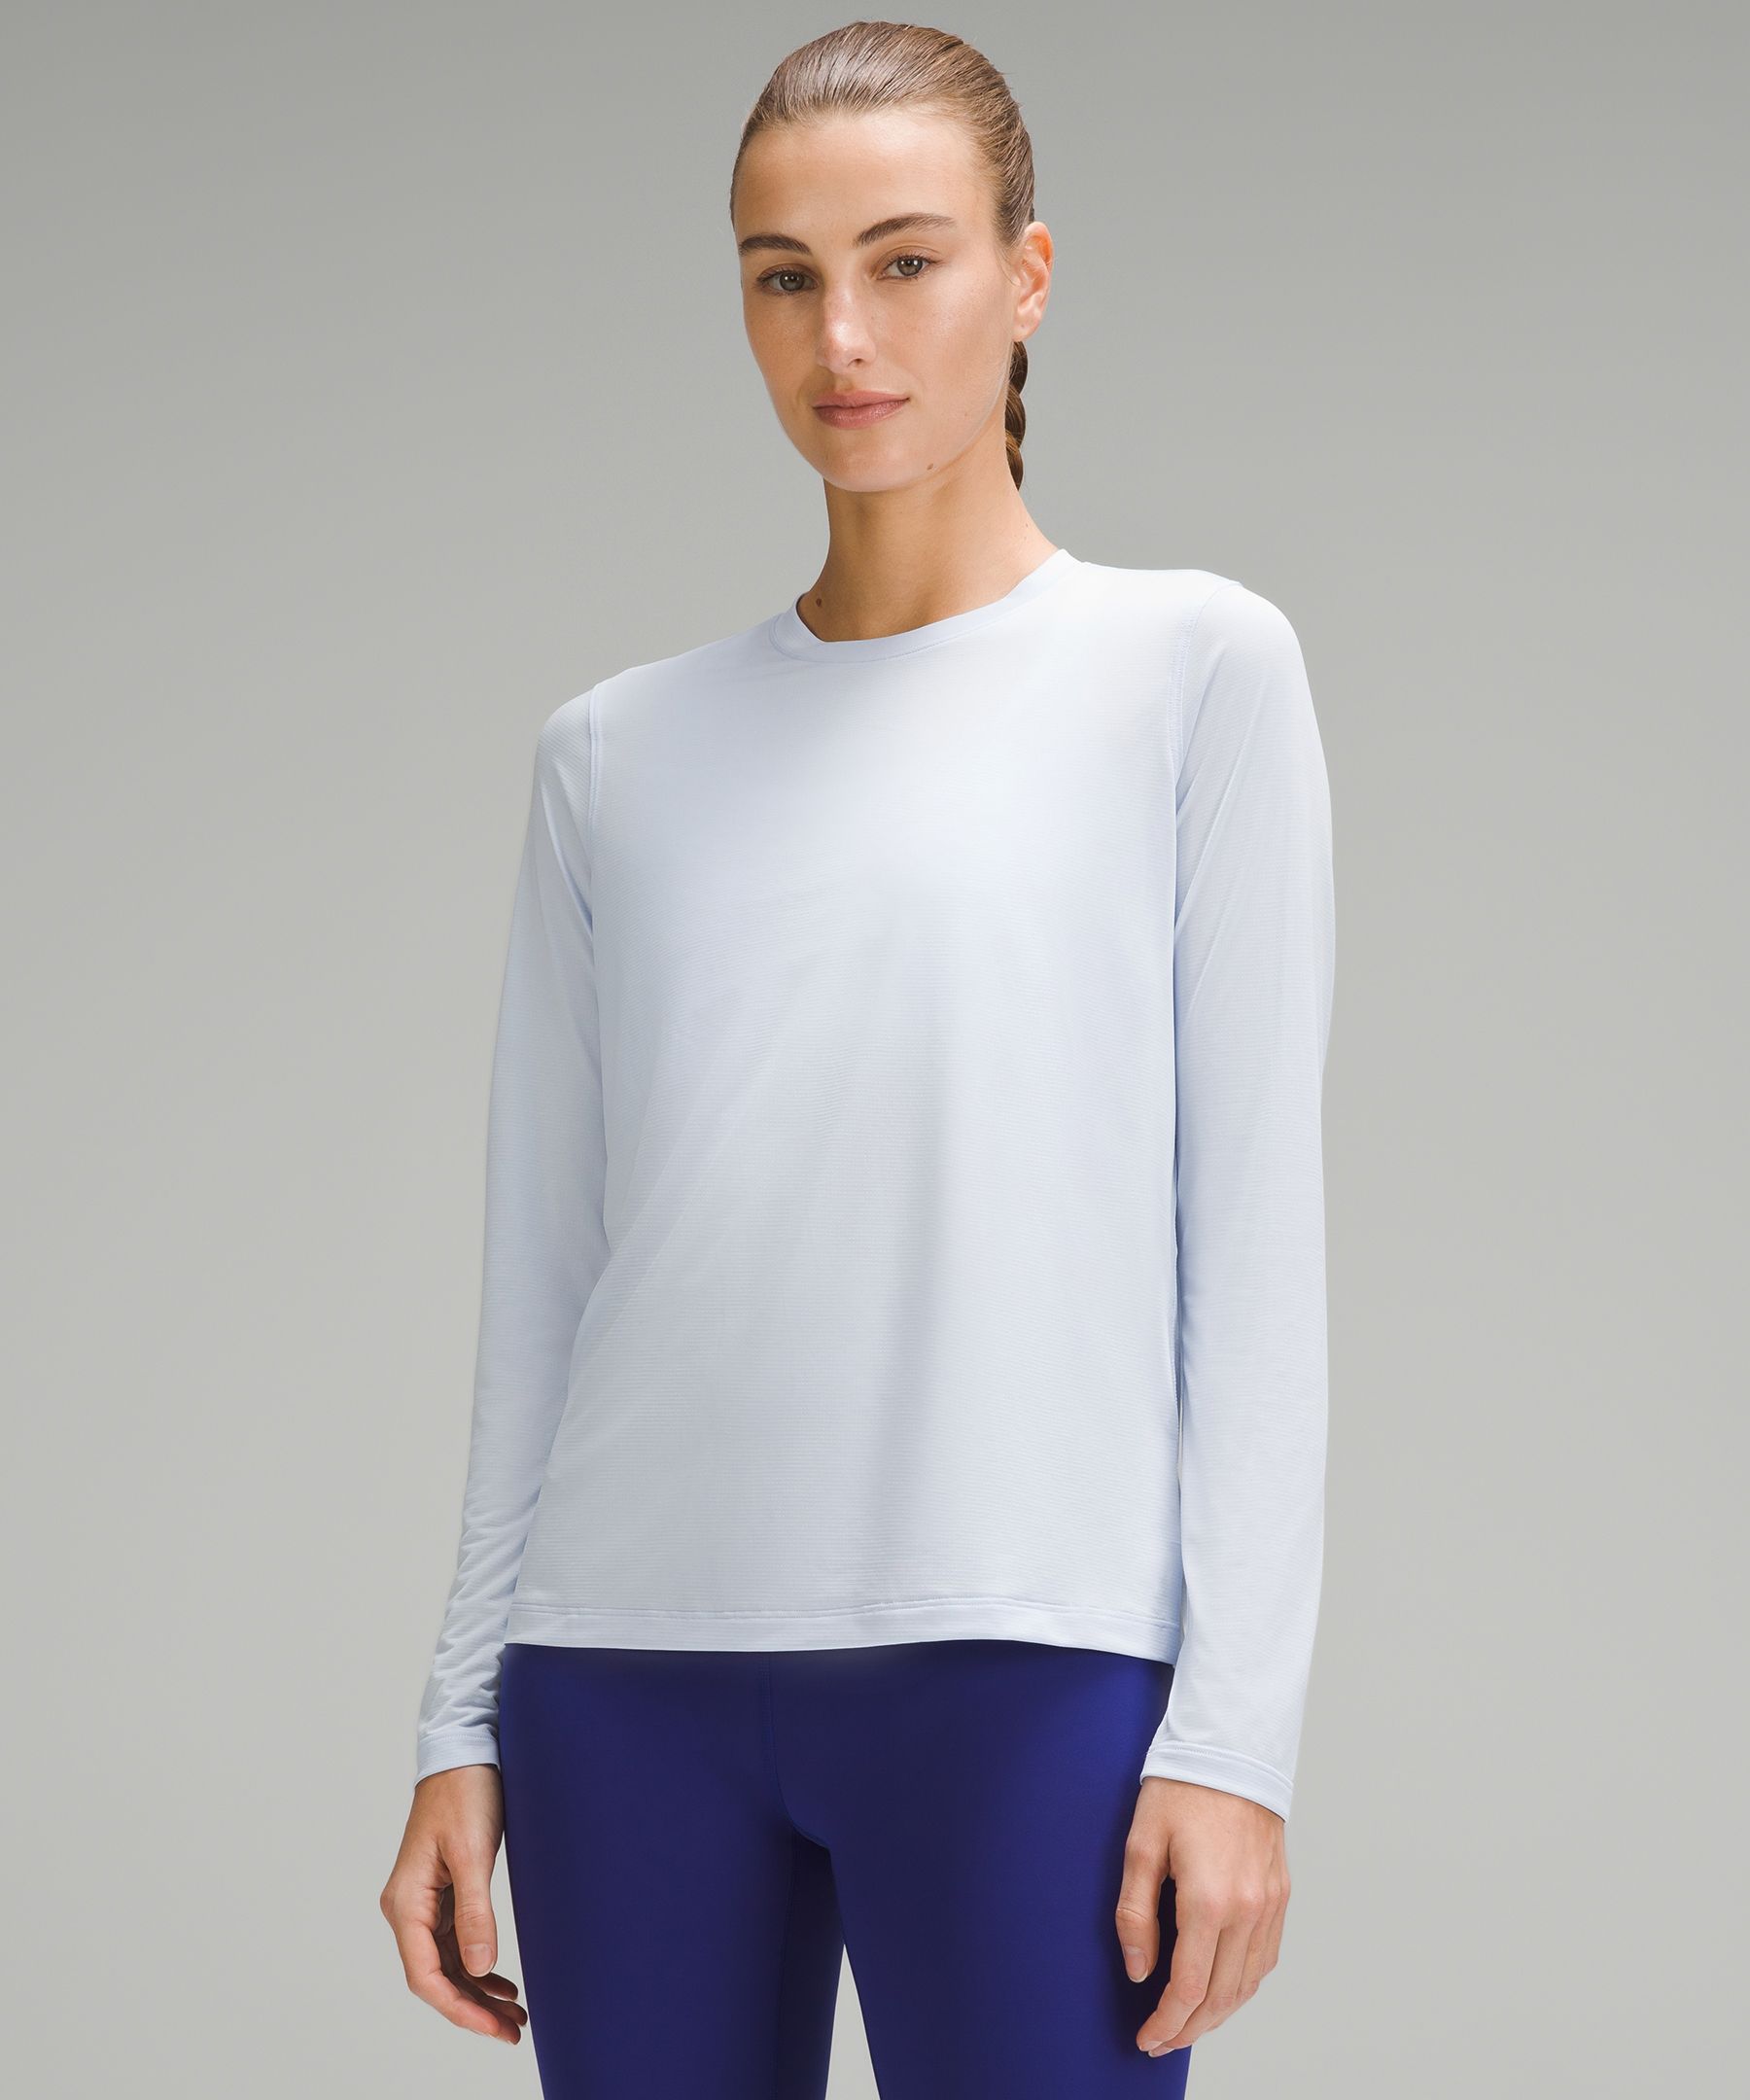 The 18 Best Long-Sleeve T-Shirts for Women, Hands Down